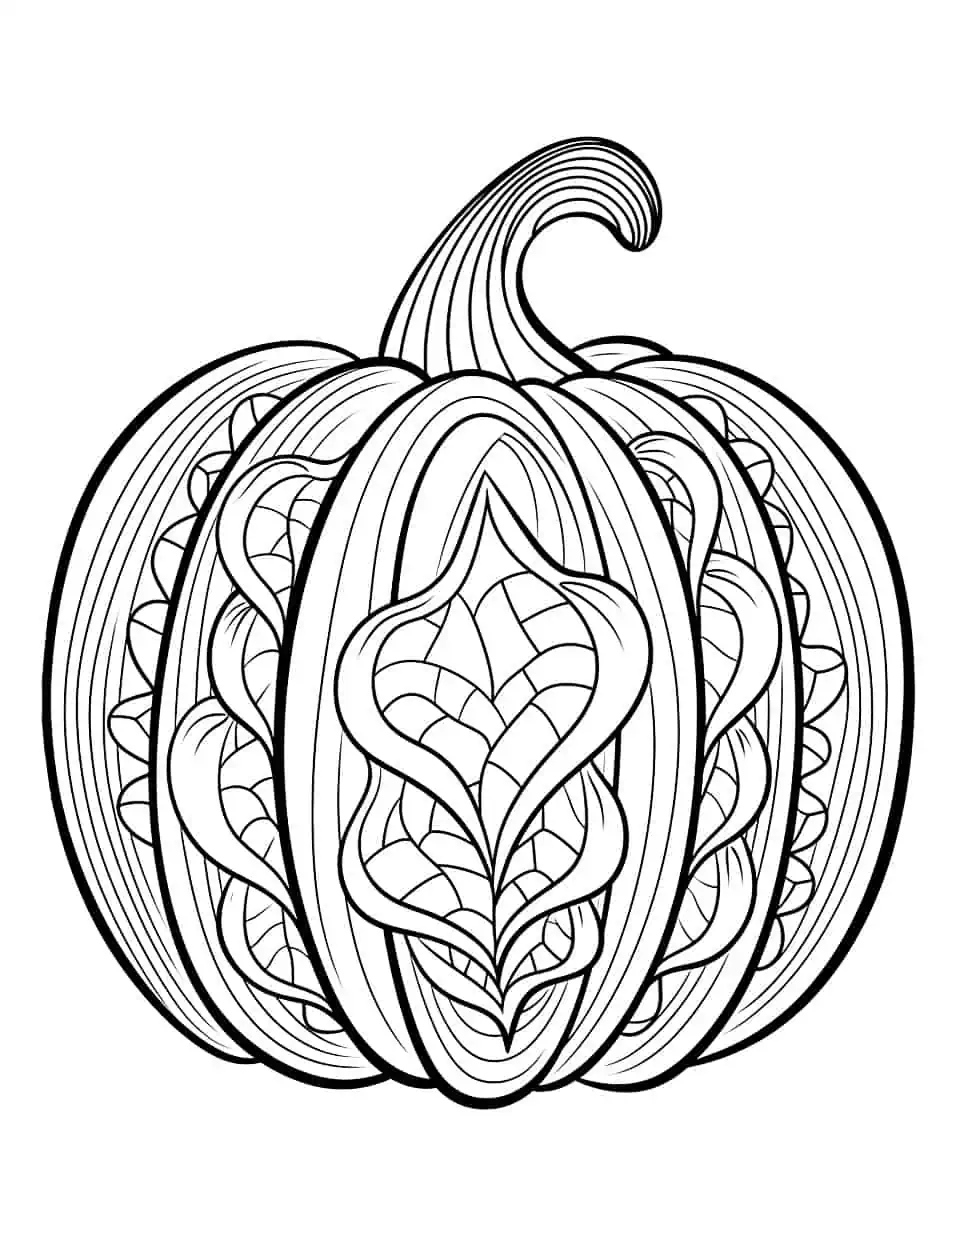 Pumpkin Zentangle Coloring Page - A complex zentangle design inside a pumpkin shape, best for older kids and adults who love intricate coloring pages.